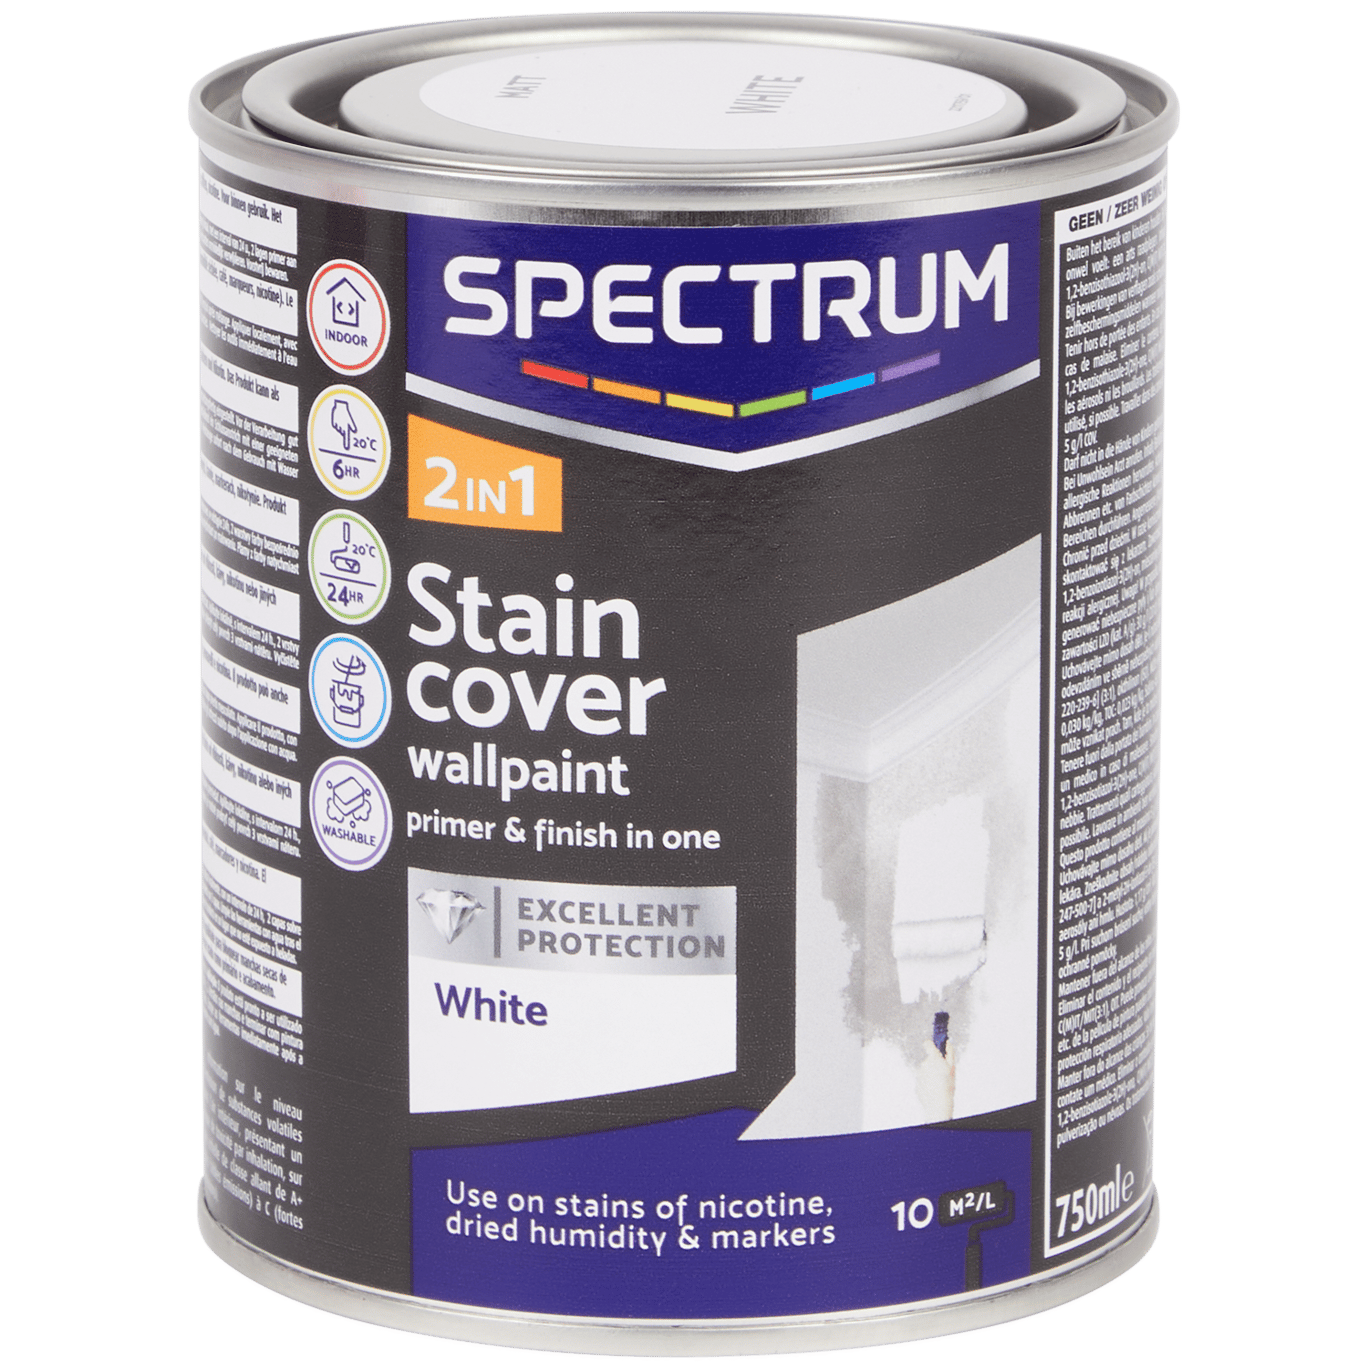 Tinta para paredes Spectrum 2-in-1 stain cover white